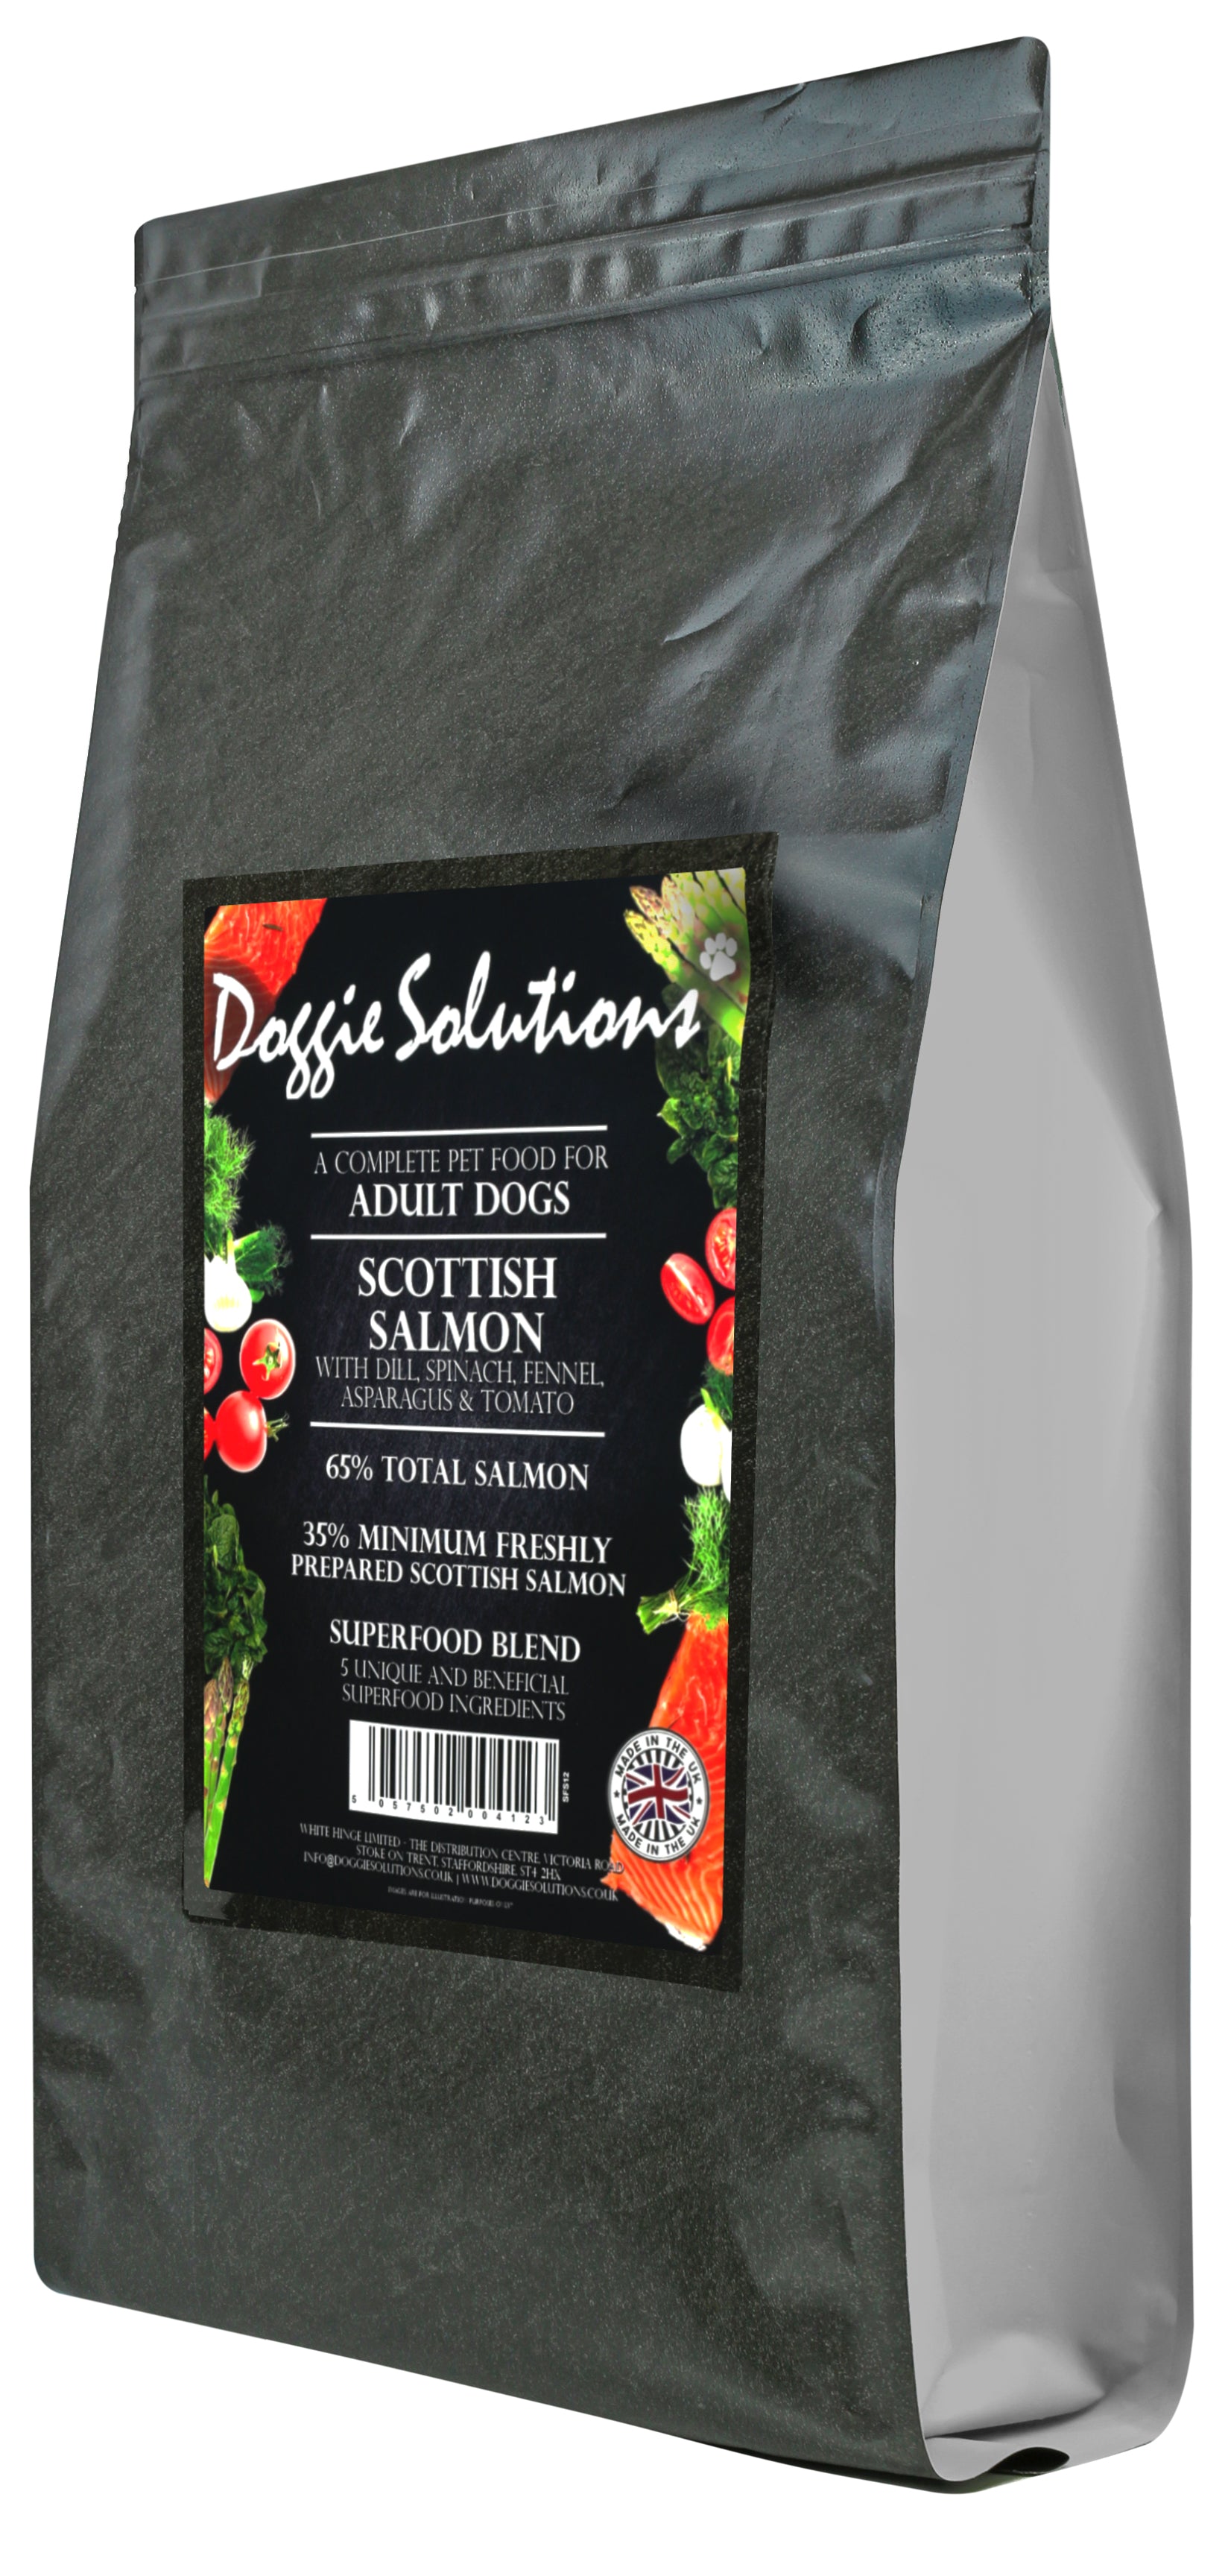 Image of Doggie Solutions Scottish Salmon with Dill, Spinach Fennel, Asparagus & Tomato Dog Food 2kg